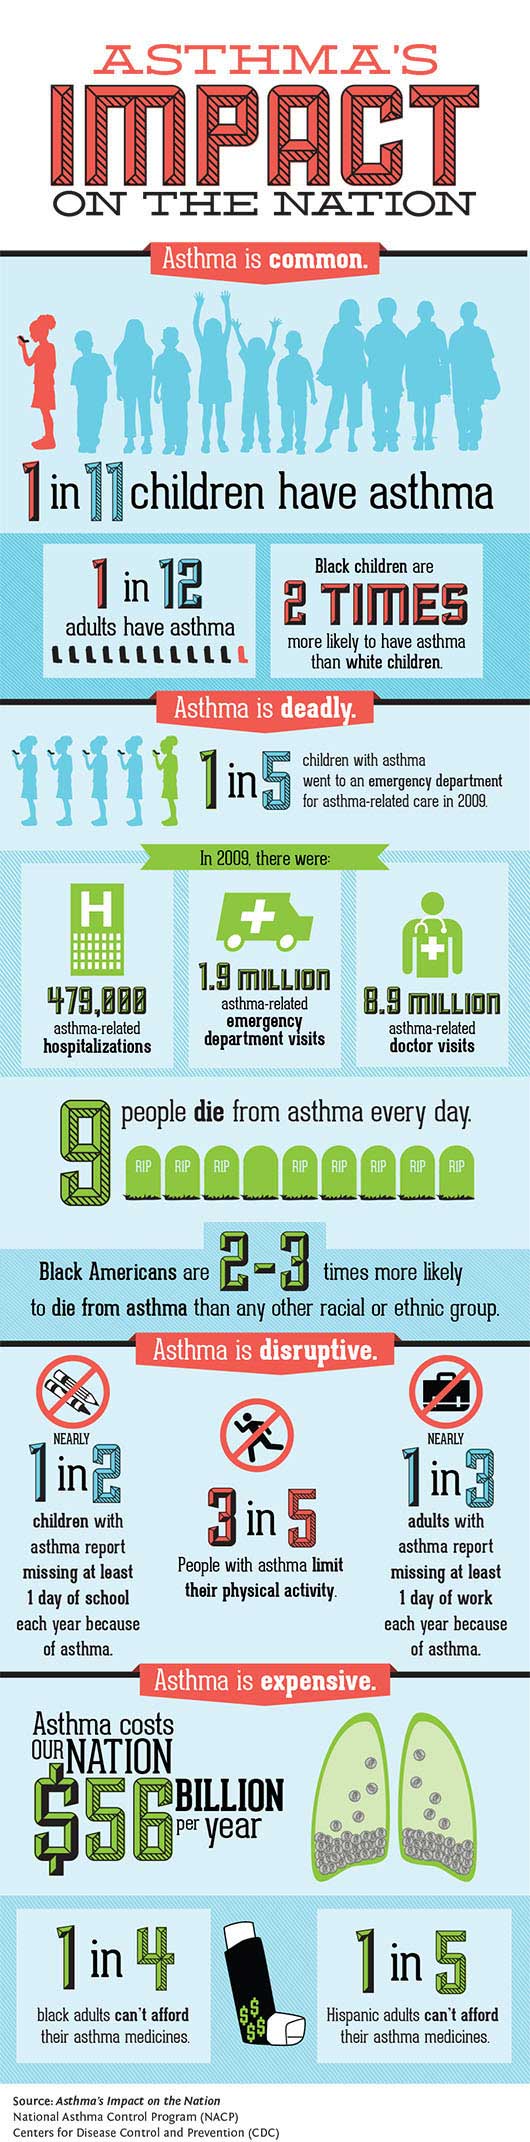 Asthma’s Impact on Children and Adults